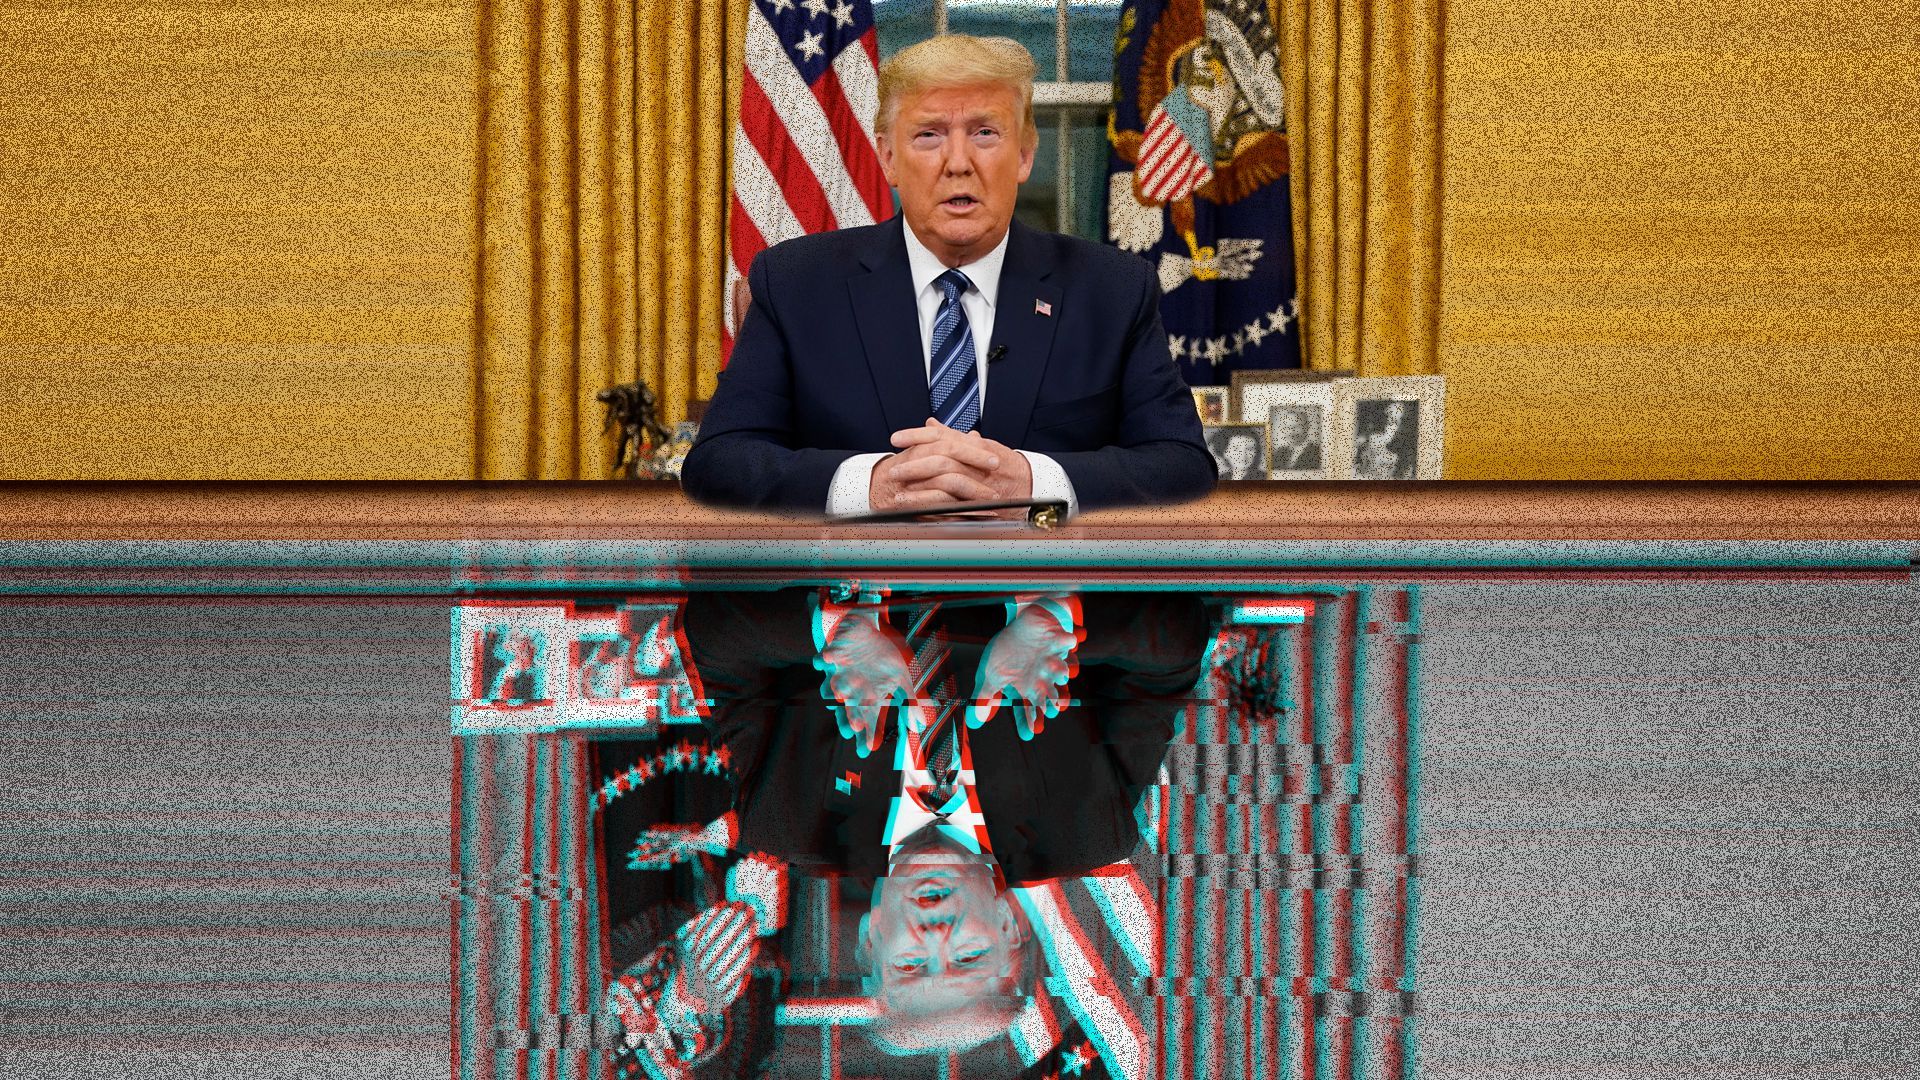 Photo illustration of two images of President Trump, one upside-down and distorted.